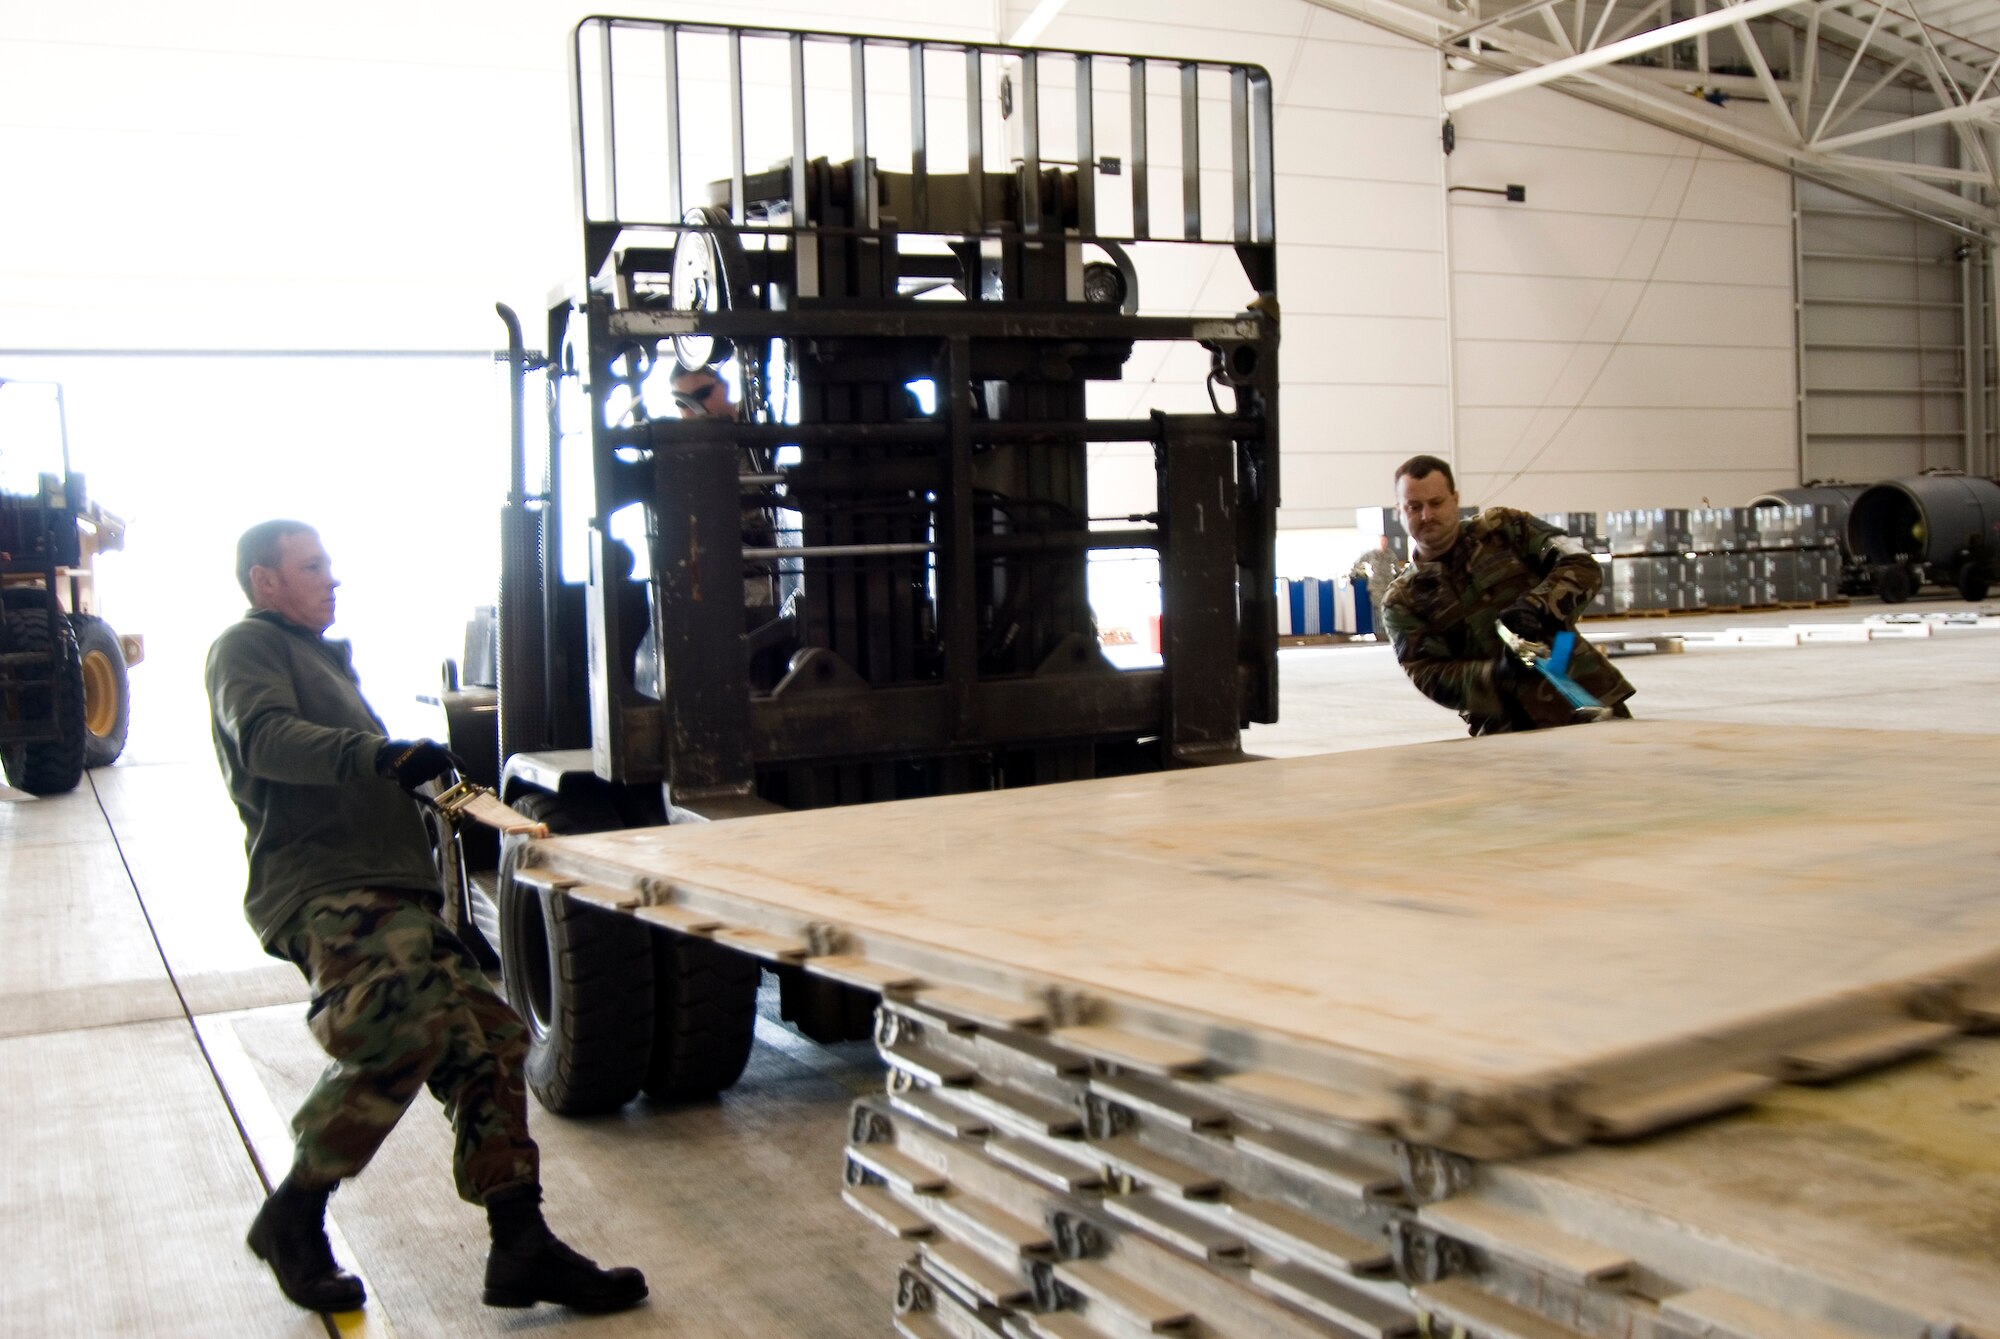 Tech. Sgt. Jody Miller and Tech. Sgt. Darren Rebuck slide pallets onto a forklift on January 15, 2010 at the 167th Airlift Wing. The air base in Martinsburg, W.Va, was transformed Janunary 14 into a staging area for more than 332,000 pounds of supplies bound for the airport at Port-au-Prince, Haiti. Hundreds of thousands of pounds more are expected to be palletized at the base for shipment to Haiti in the coming days. (U.S. Air Force photo MSgt Emily Beightol-Deyerle)